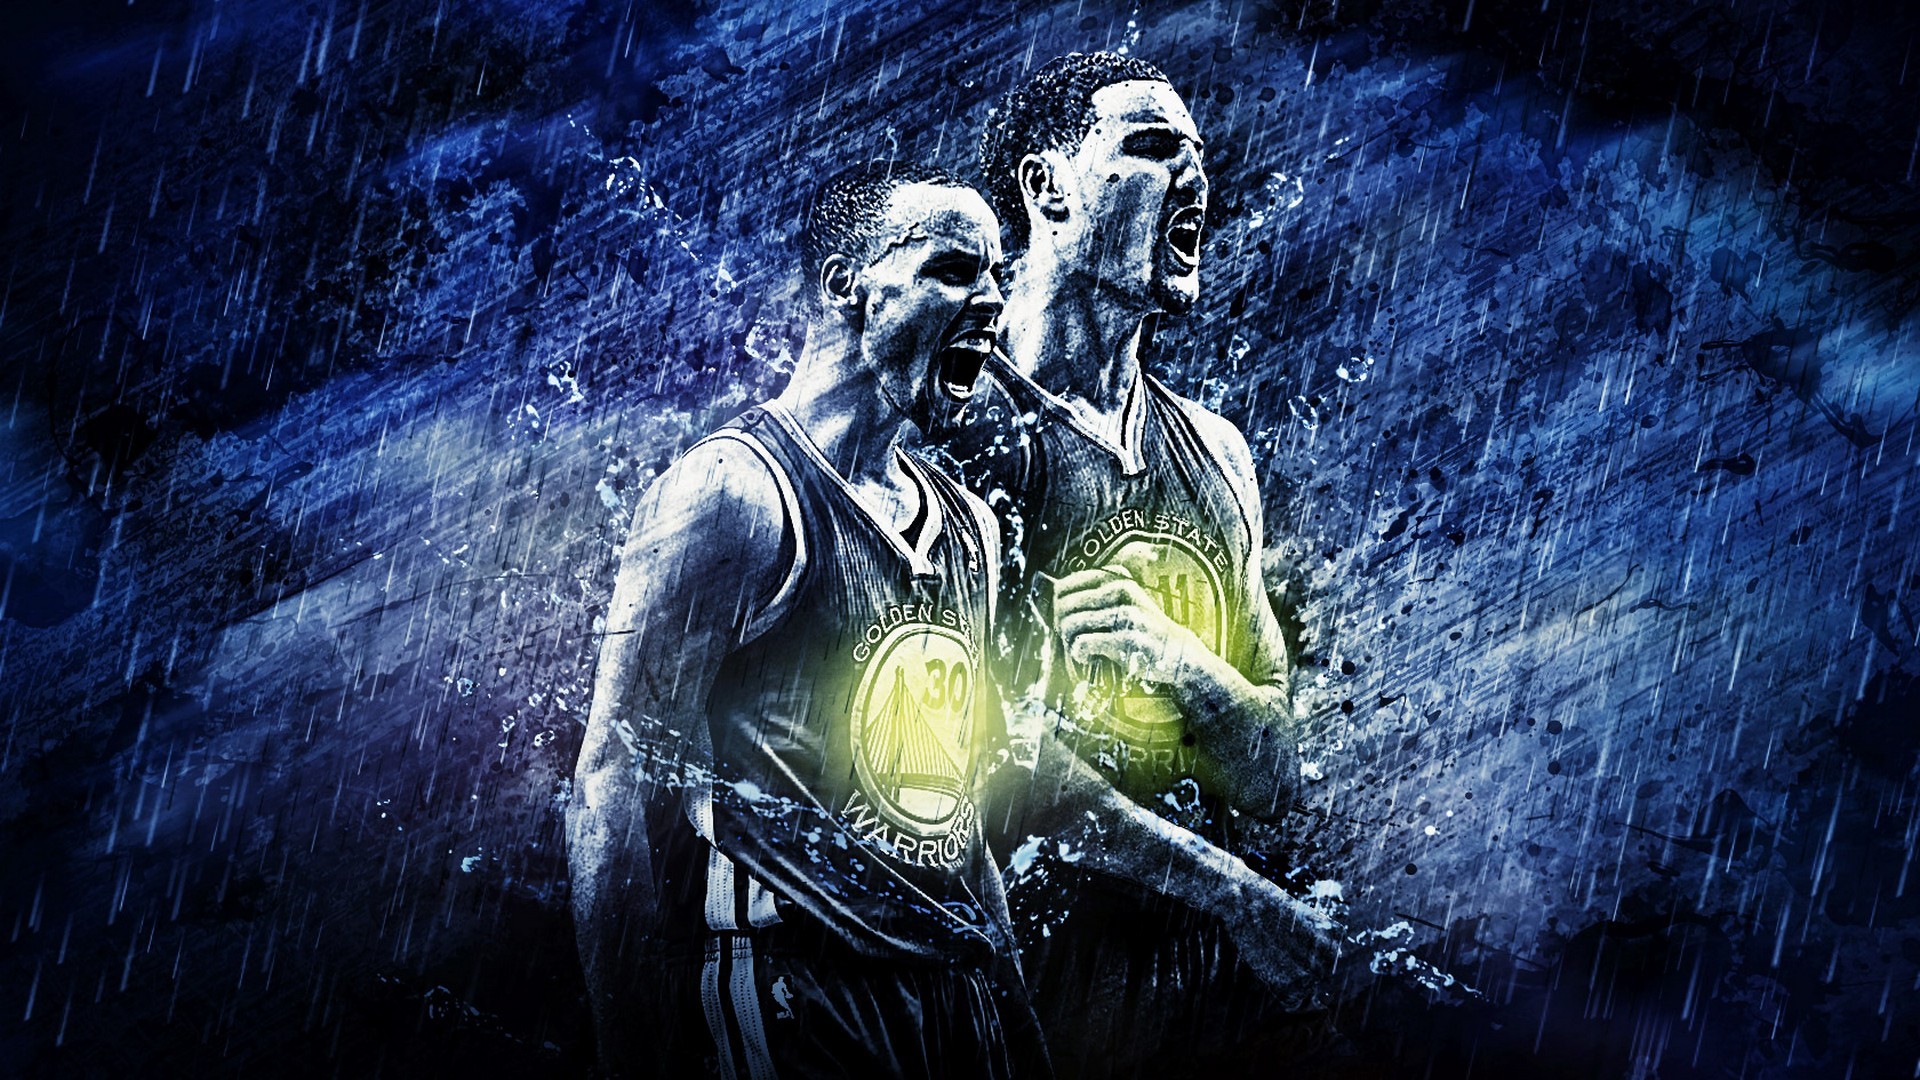 Golden State Warriors For PC Wallpaper With Resolution 1920X1080